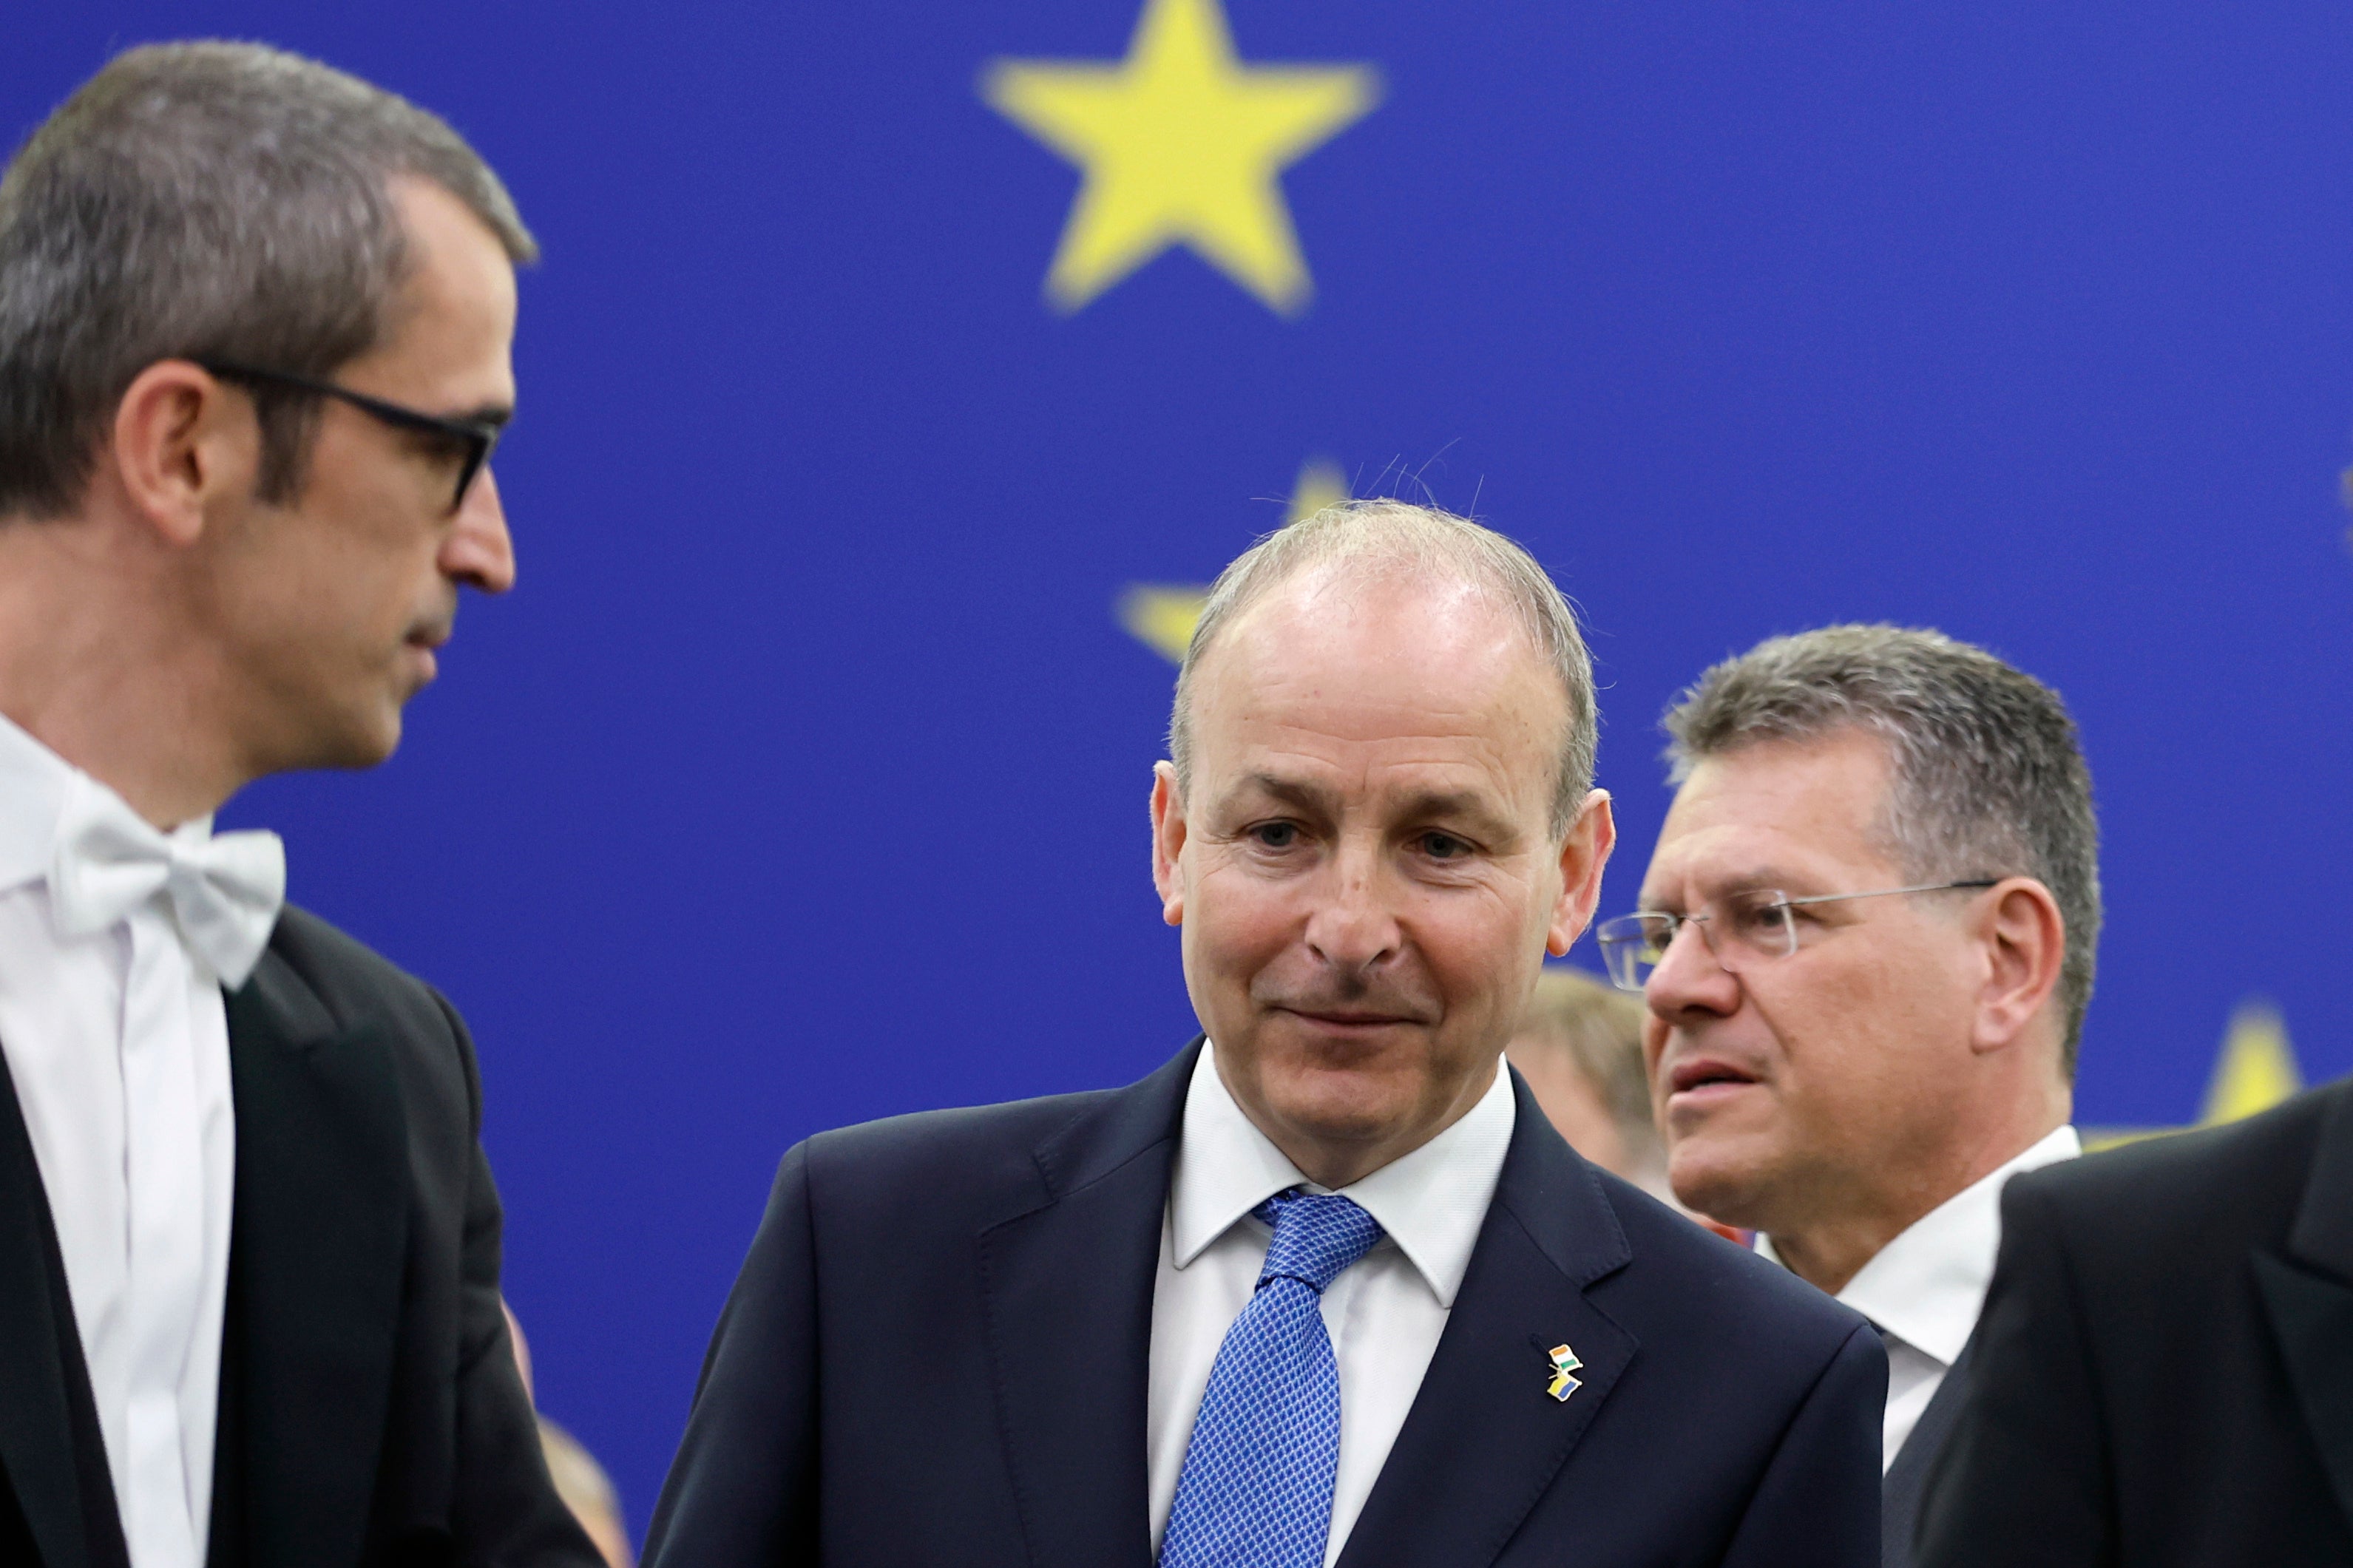 Micheal Martin, centre, was speaking during a visit to Strasbourg